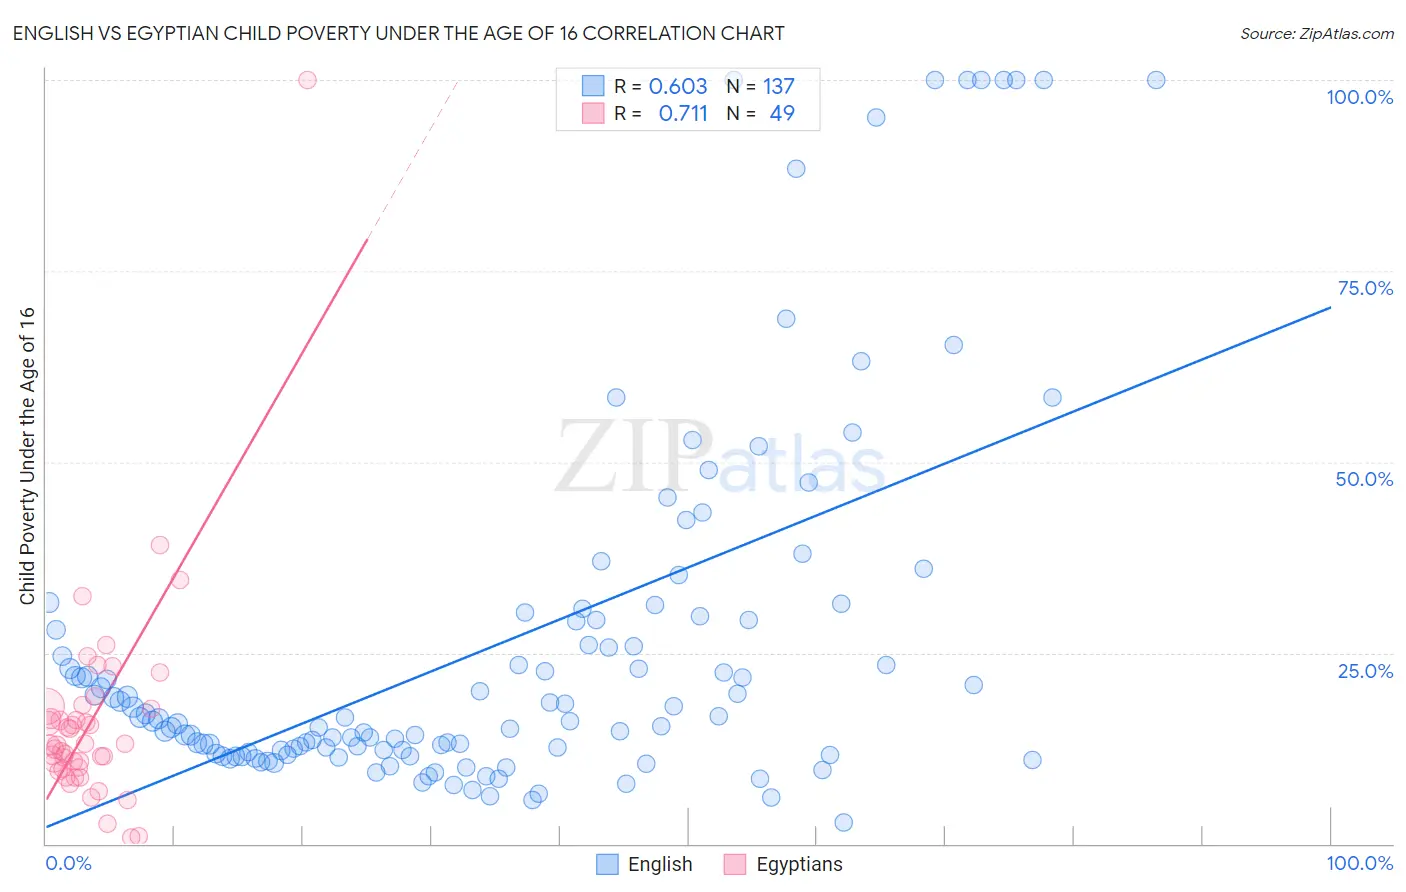 English vs Egyptian Child Poverty Under the Age of 16